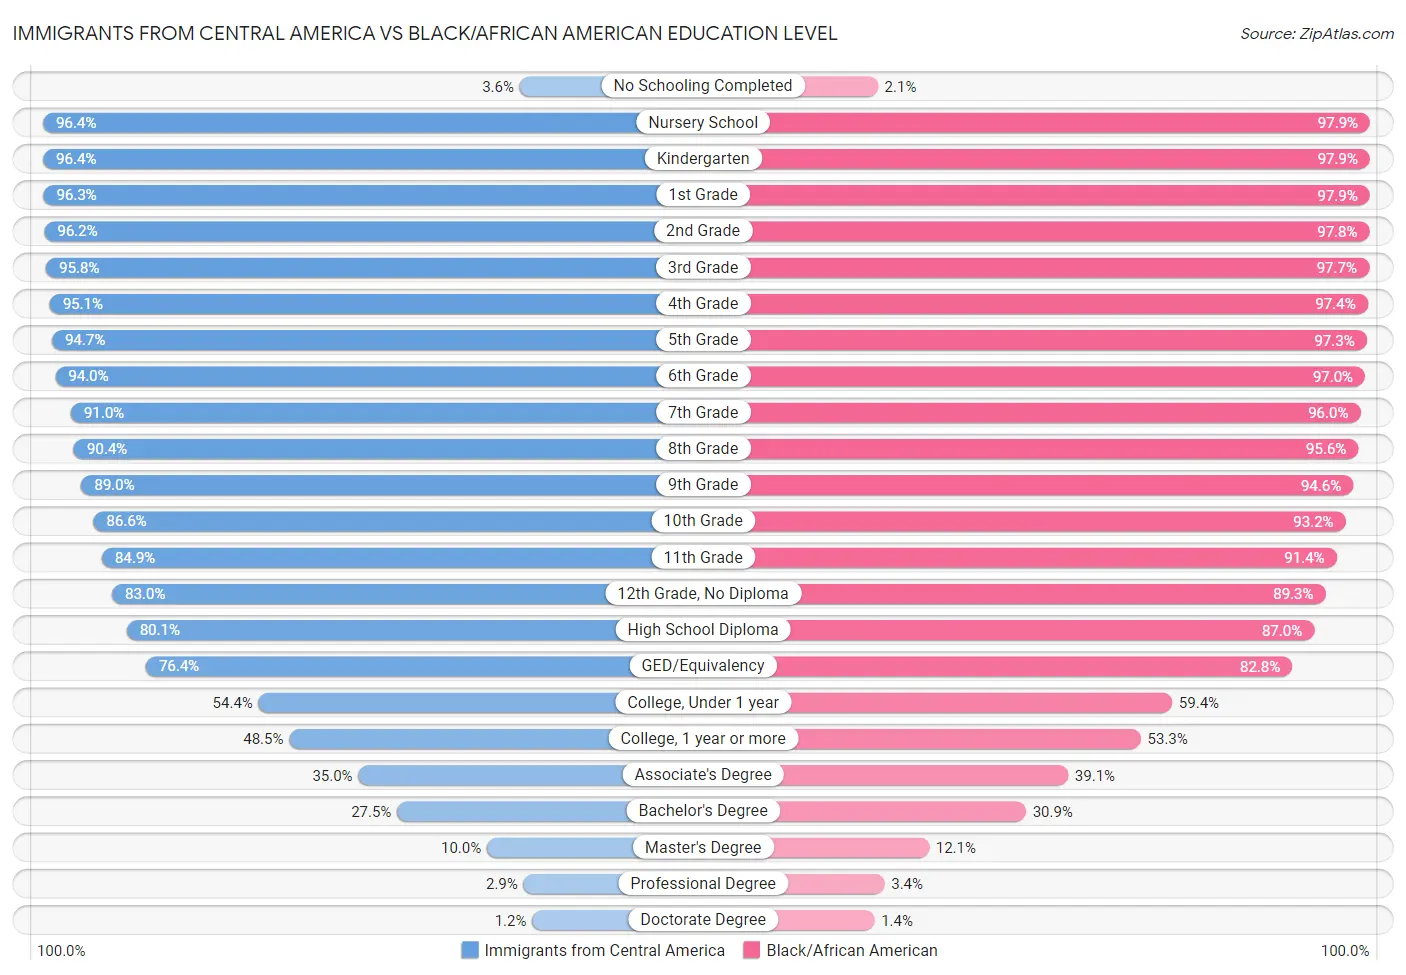 Immigrants from Central America vs Black/African American Education Level